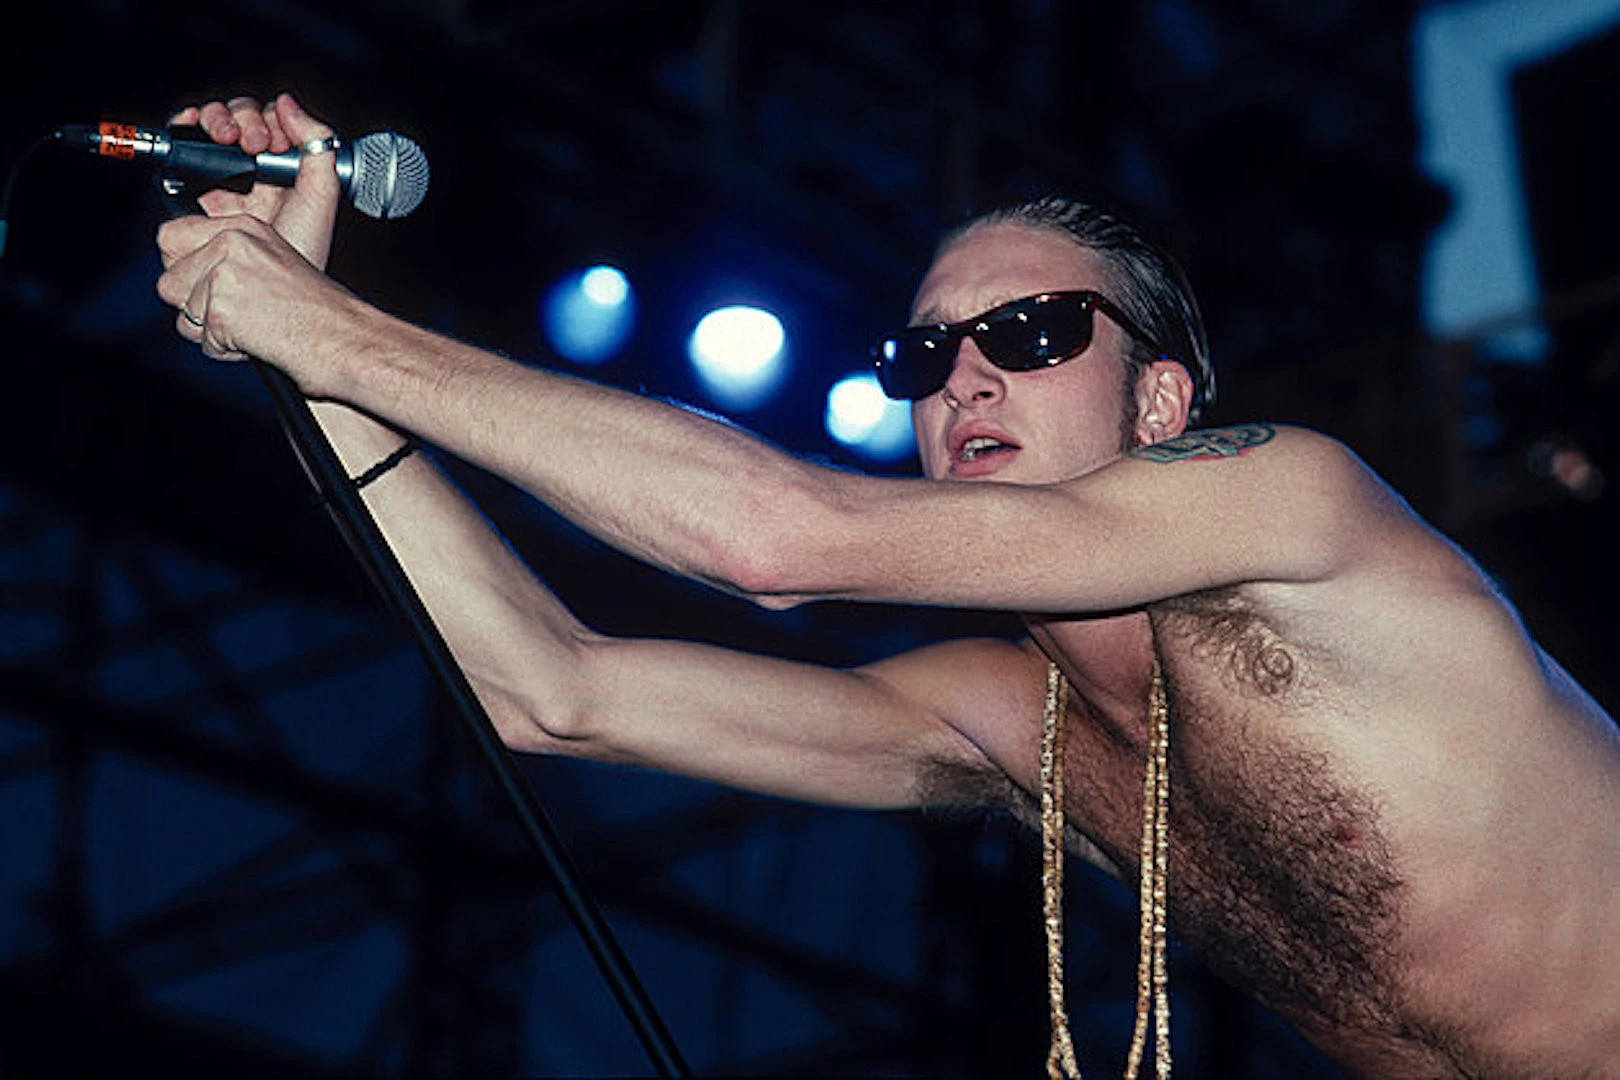 Layne Staley - that face. That smile. Those sunglasses. That talent. |  Cantores, Alice in chains, Música rock